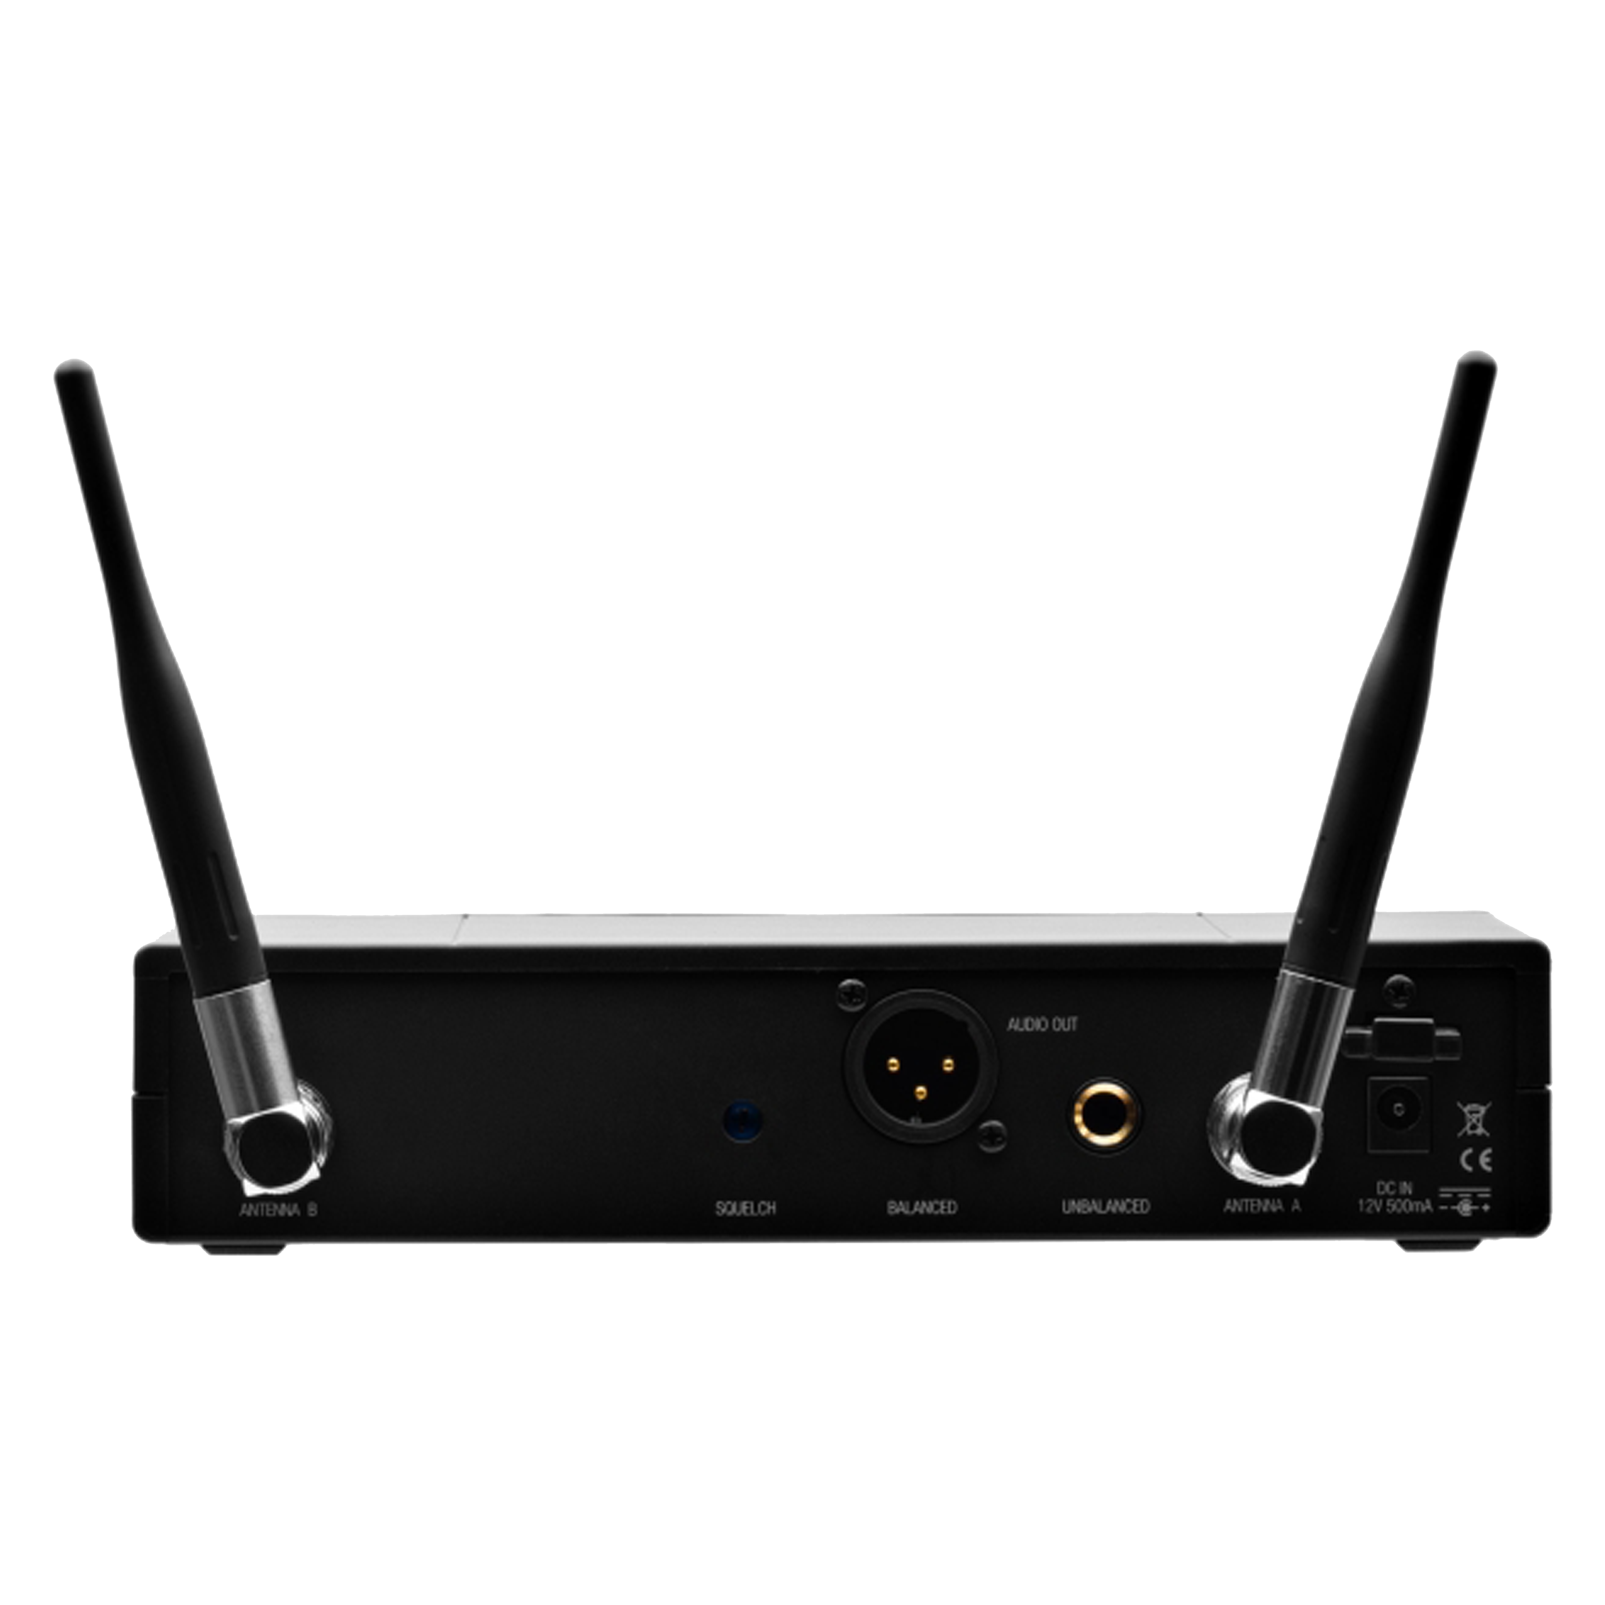 WMS420 Instrumental Set Band-A - Black - Professional wireless microphone system - Back